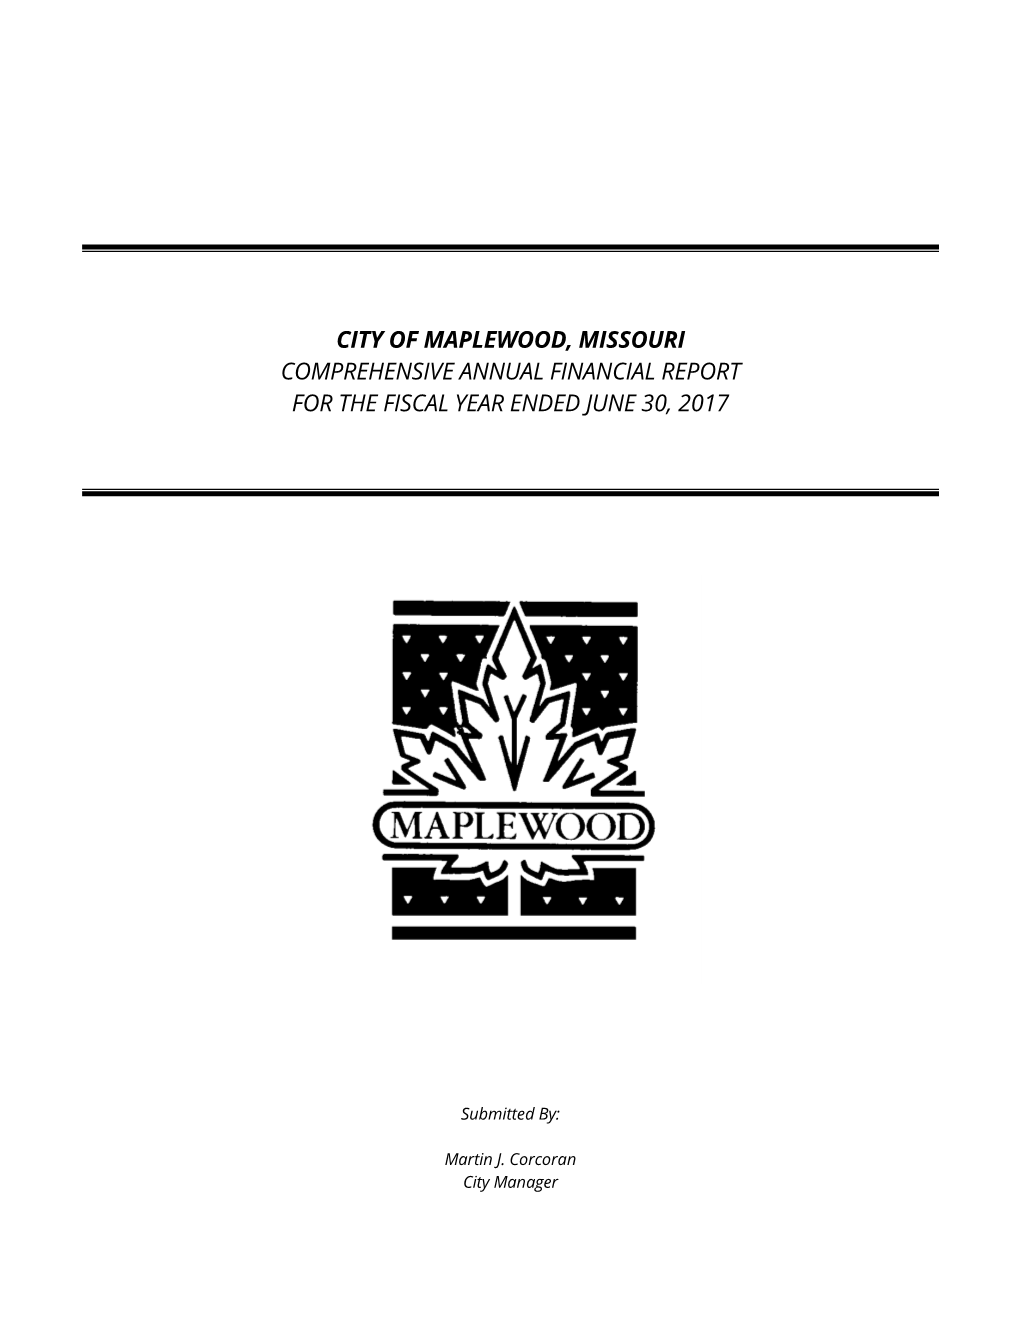 City of Maplewood, Missouri Comprehensive Annual Financial Report for the Fiscal Year Ended June 30, 2017